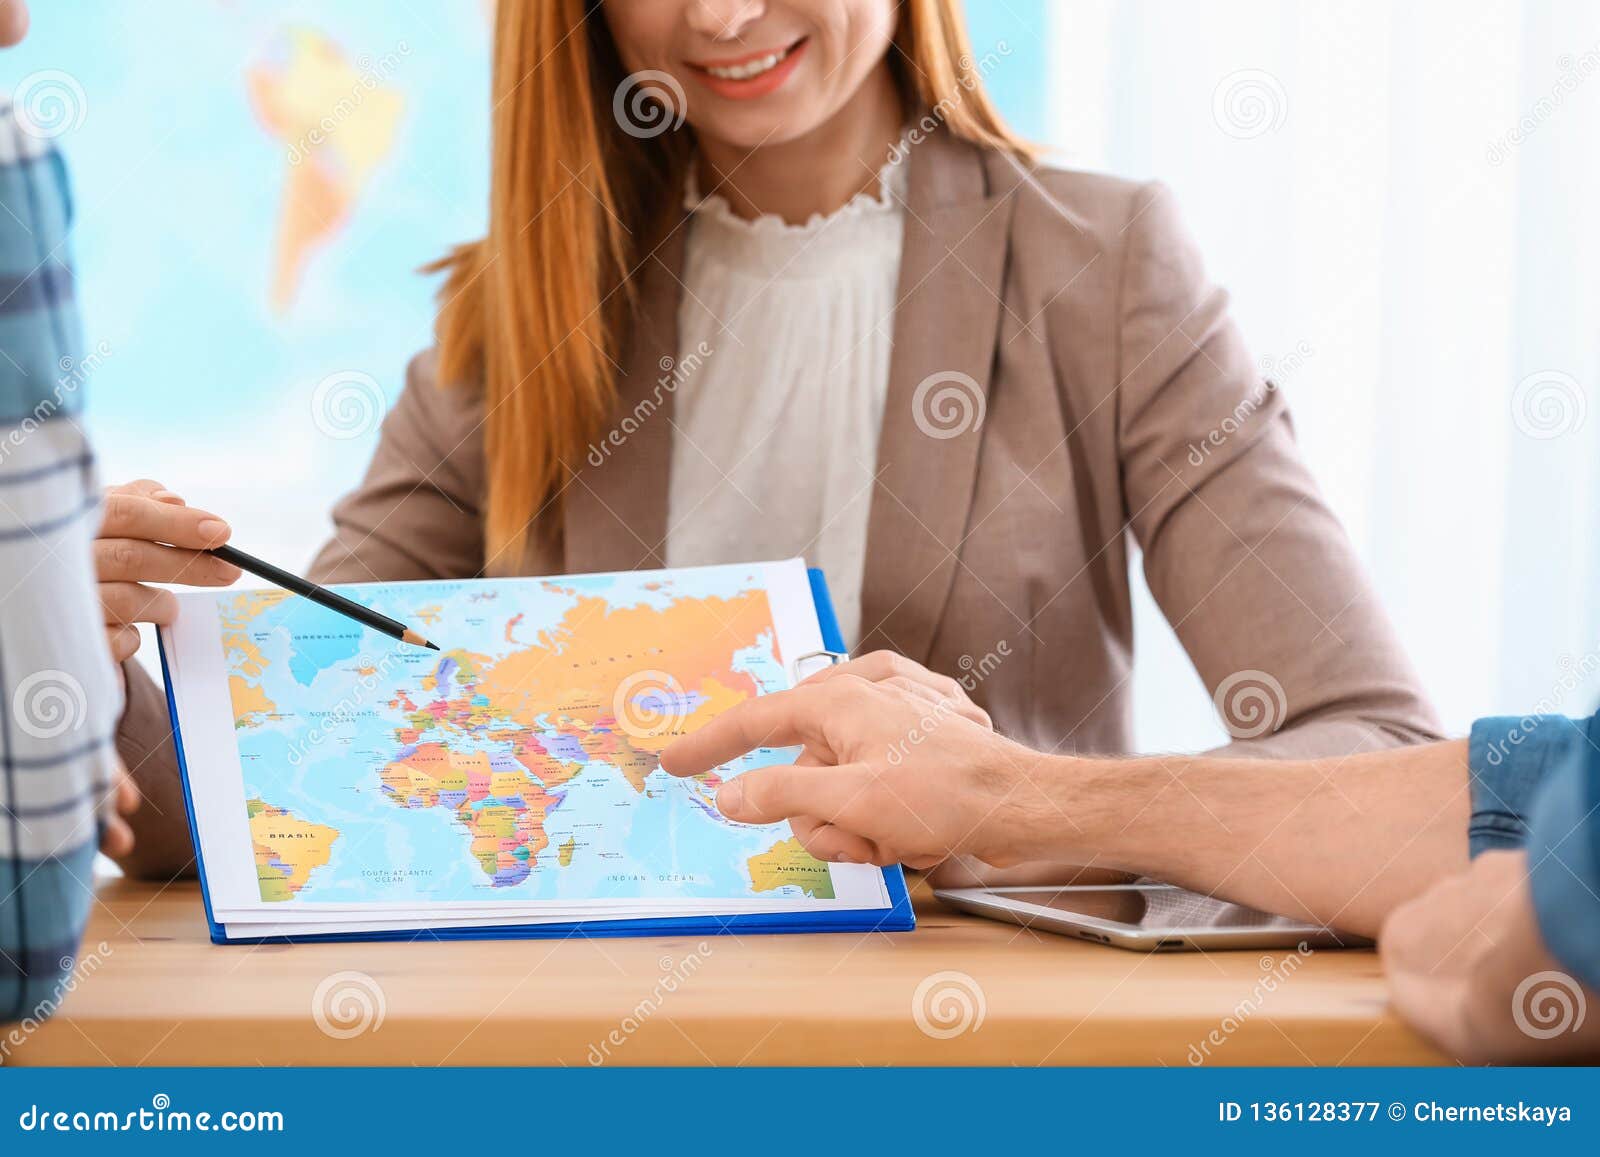 travel agency consulting